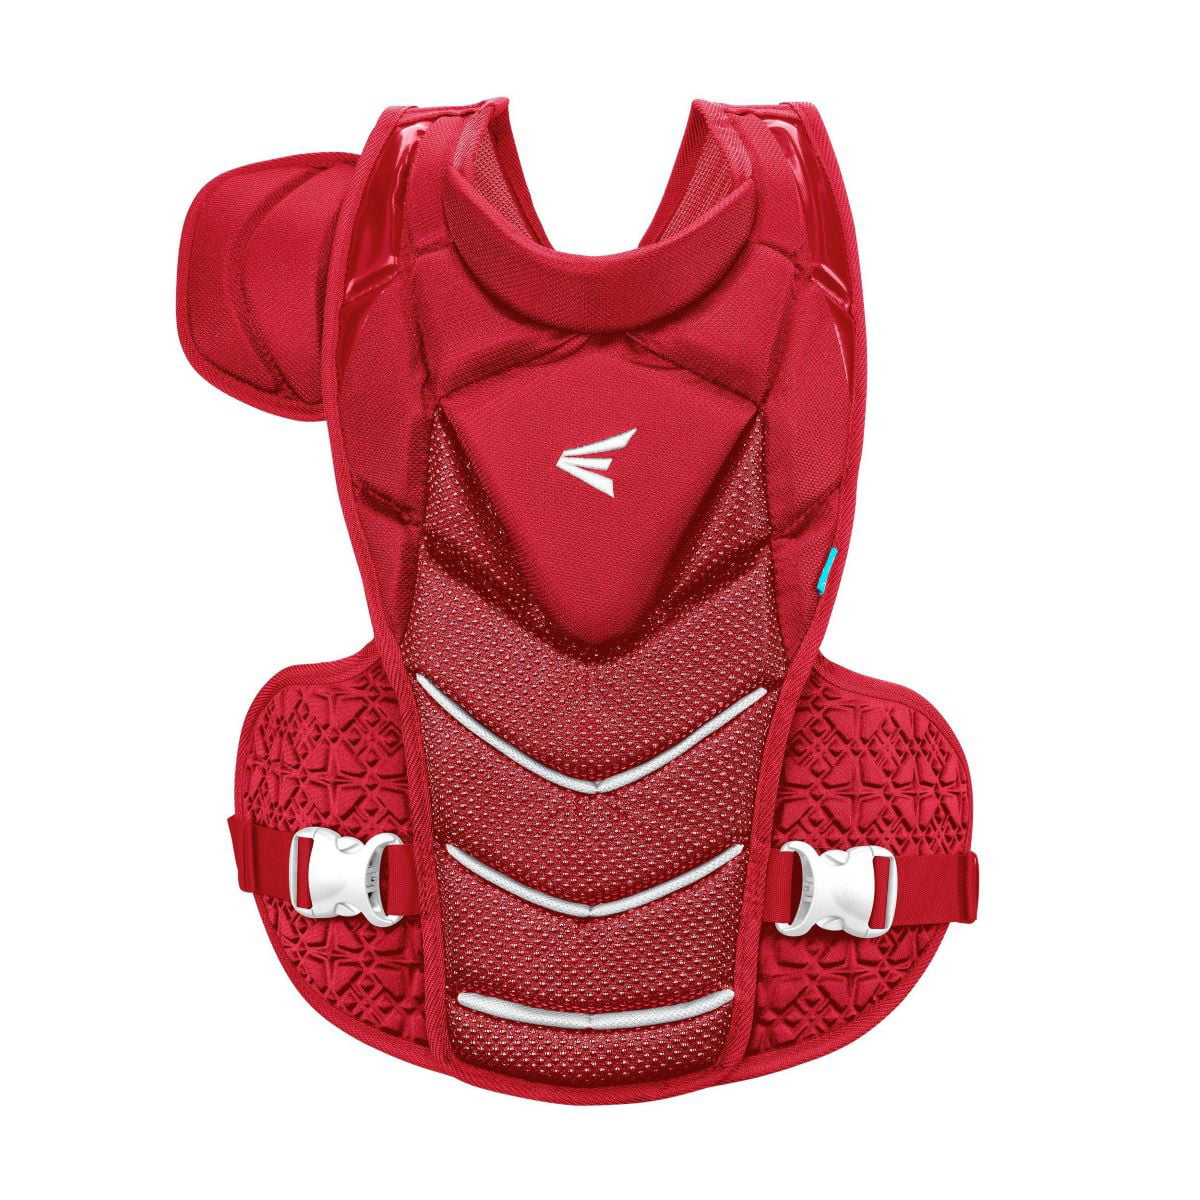 Easton Jen Schro The Very Best Fastpitch Softball Catchers Chest Protector,  Red, Large (17) 